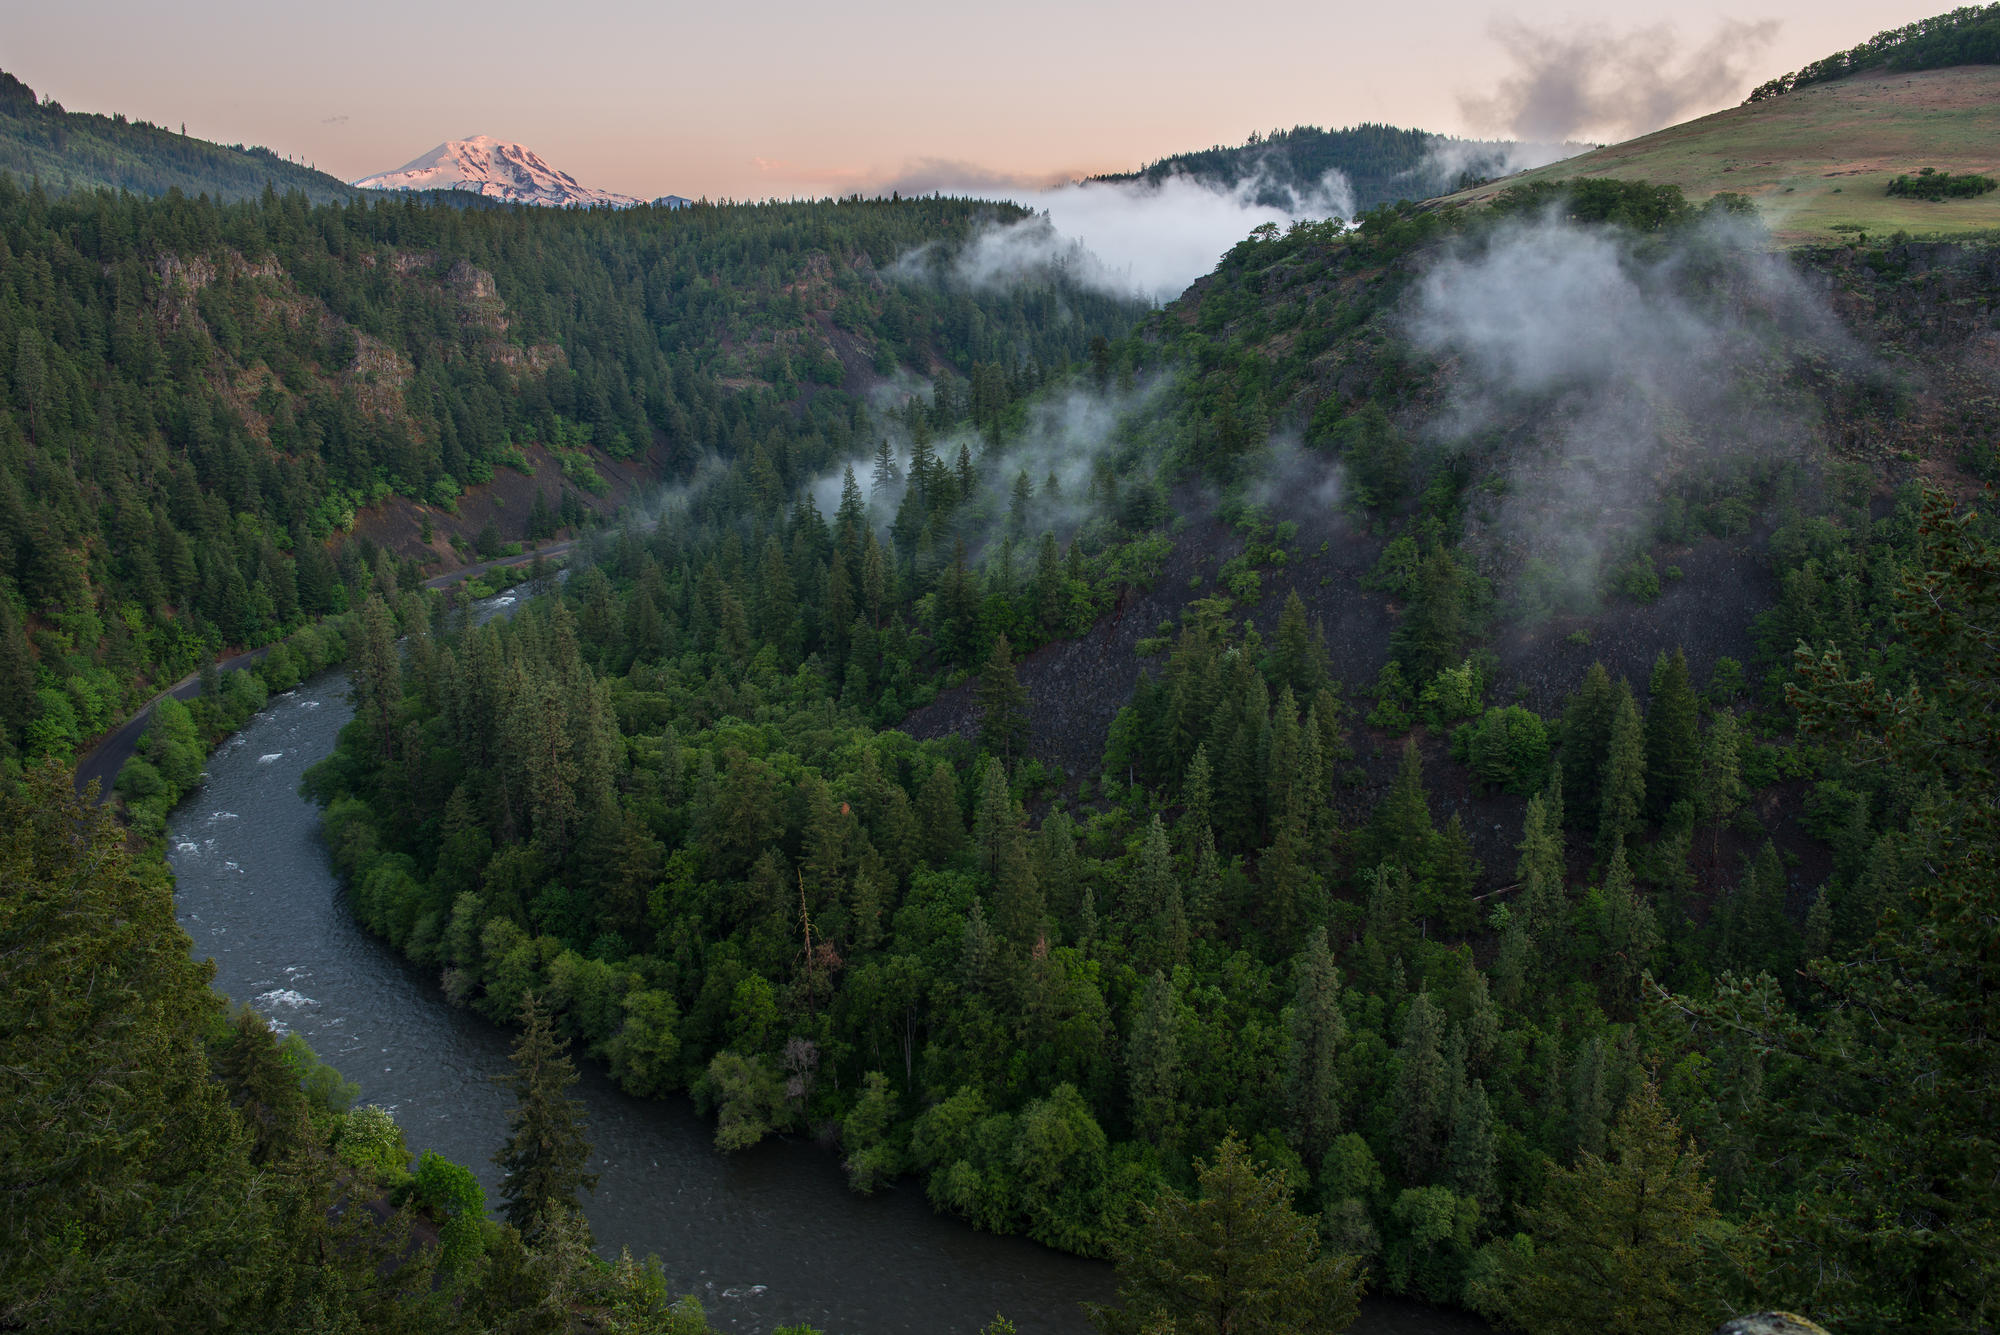 Klickitat River winds through a forested canyon, with Mt. Adams beyond.